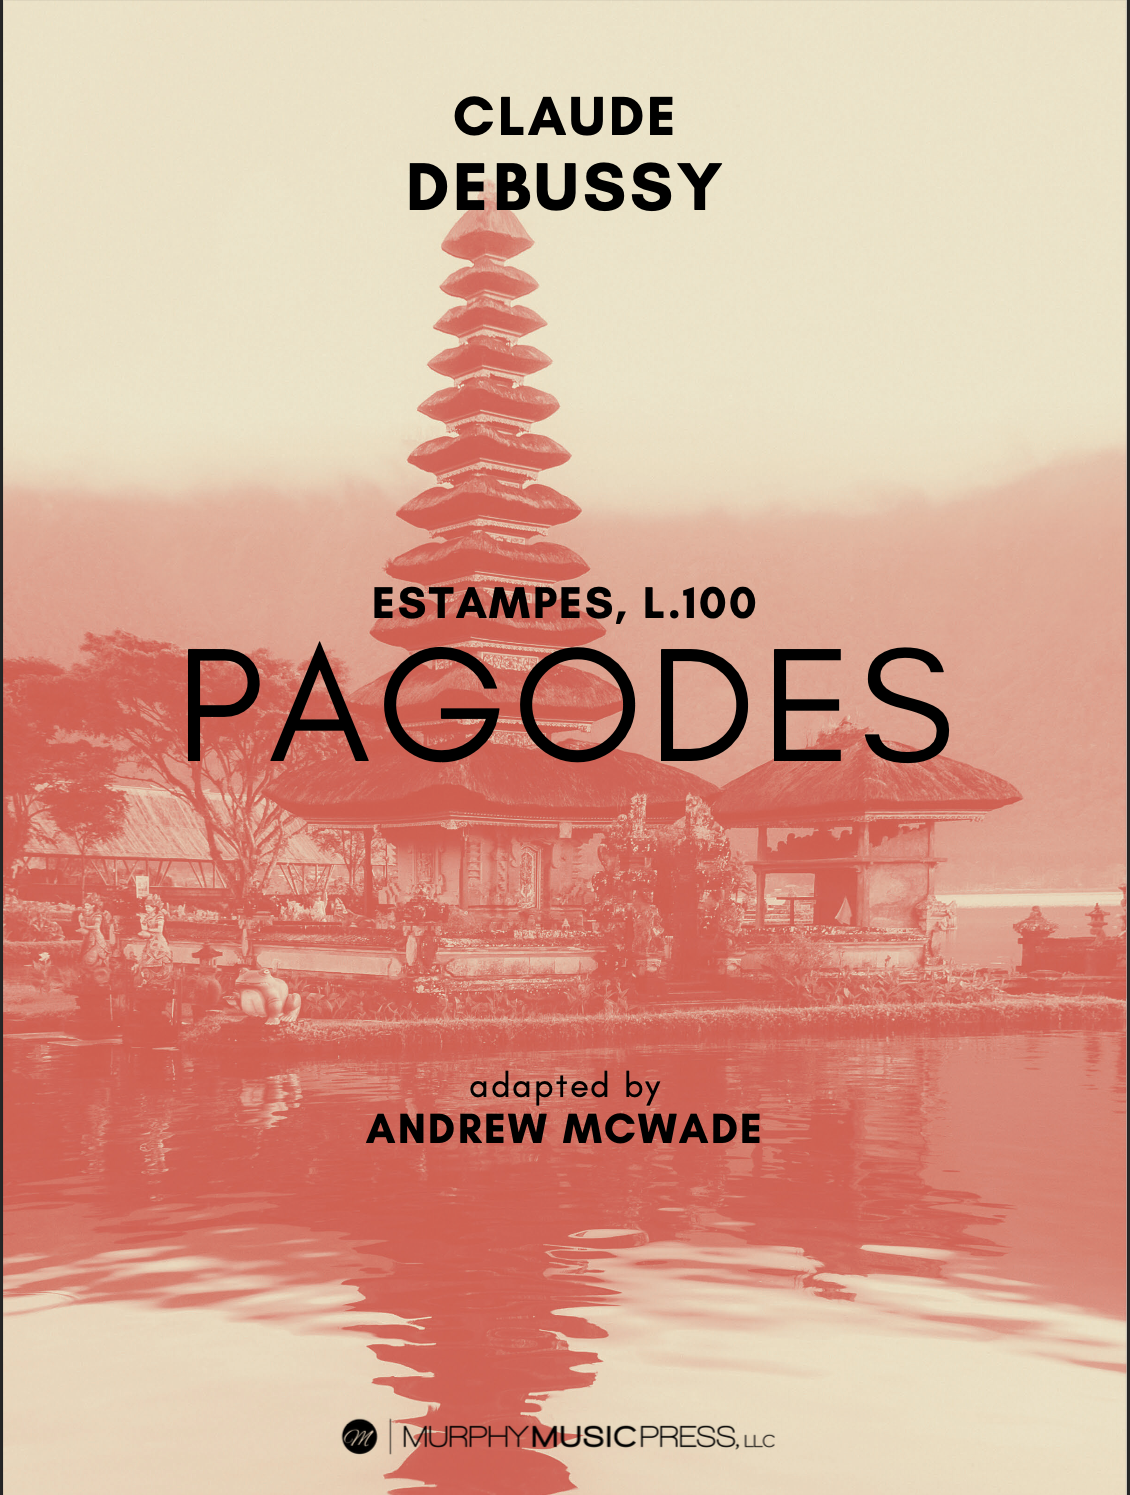 Pagodes by Calude Debussy adapted by Andrew McWade